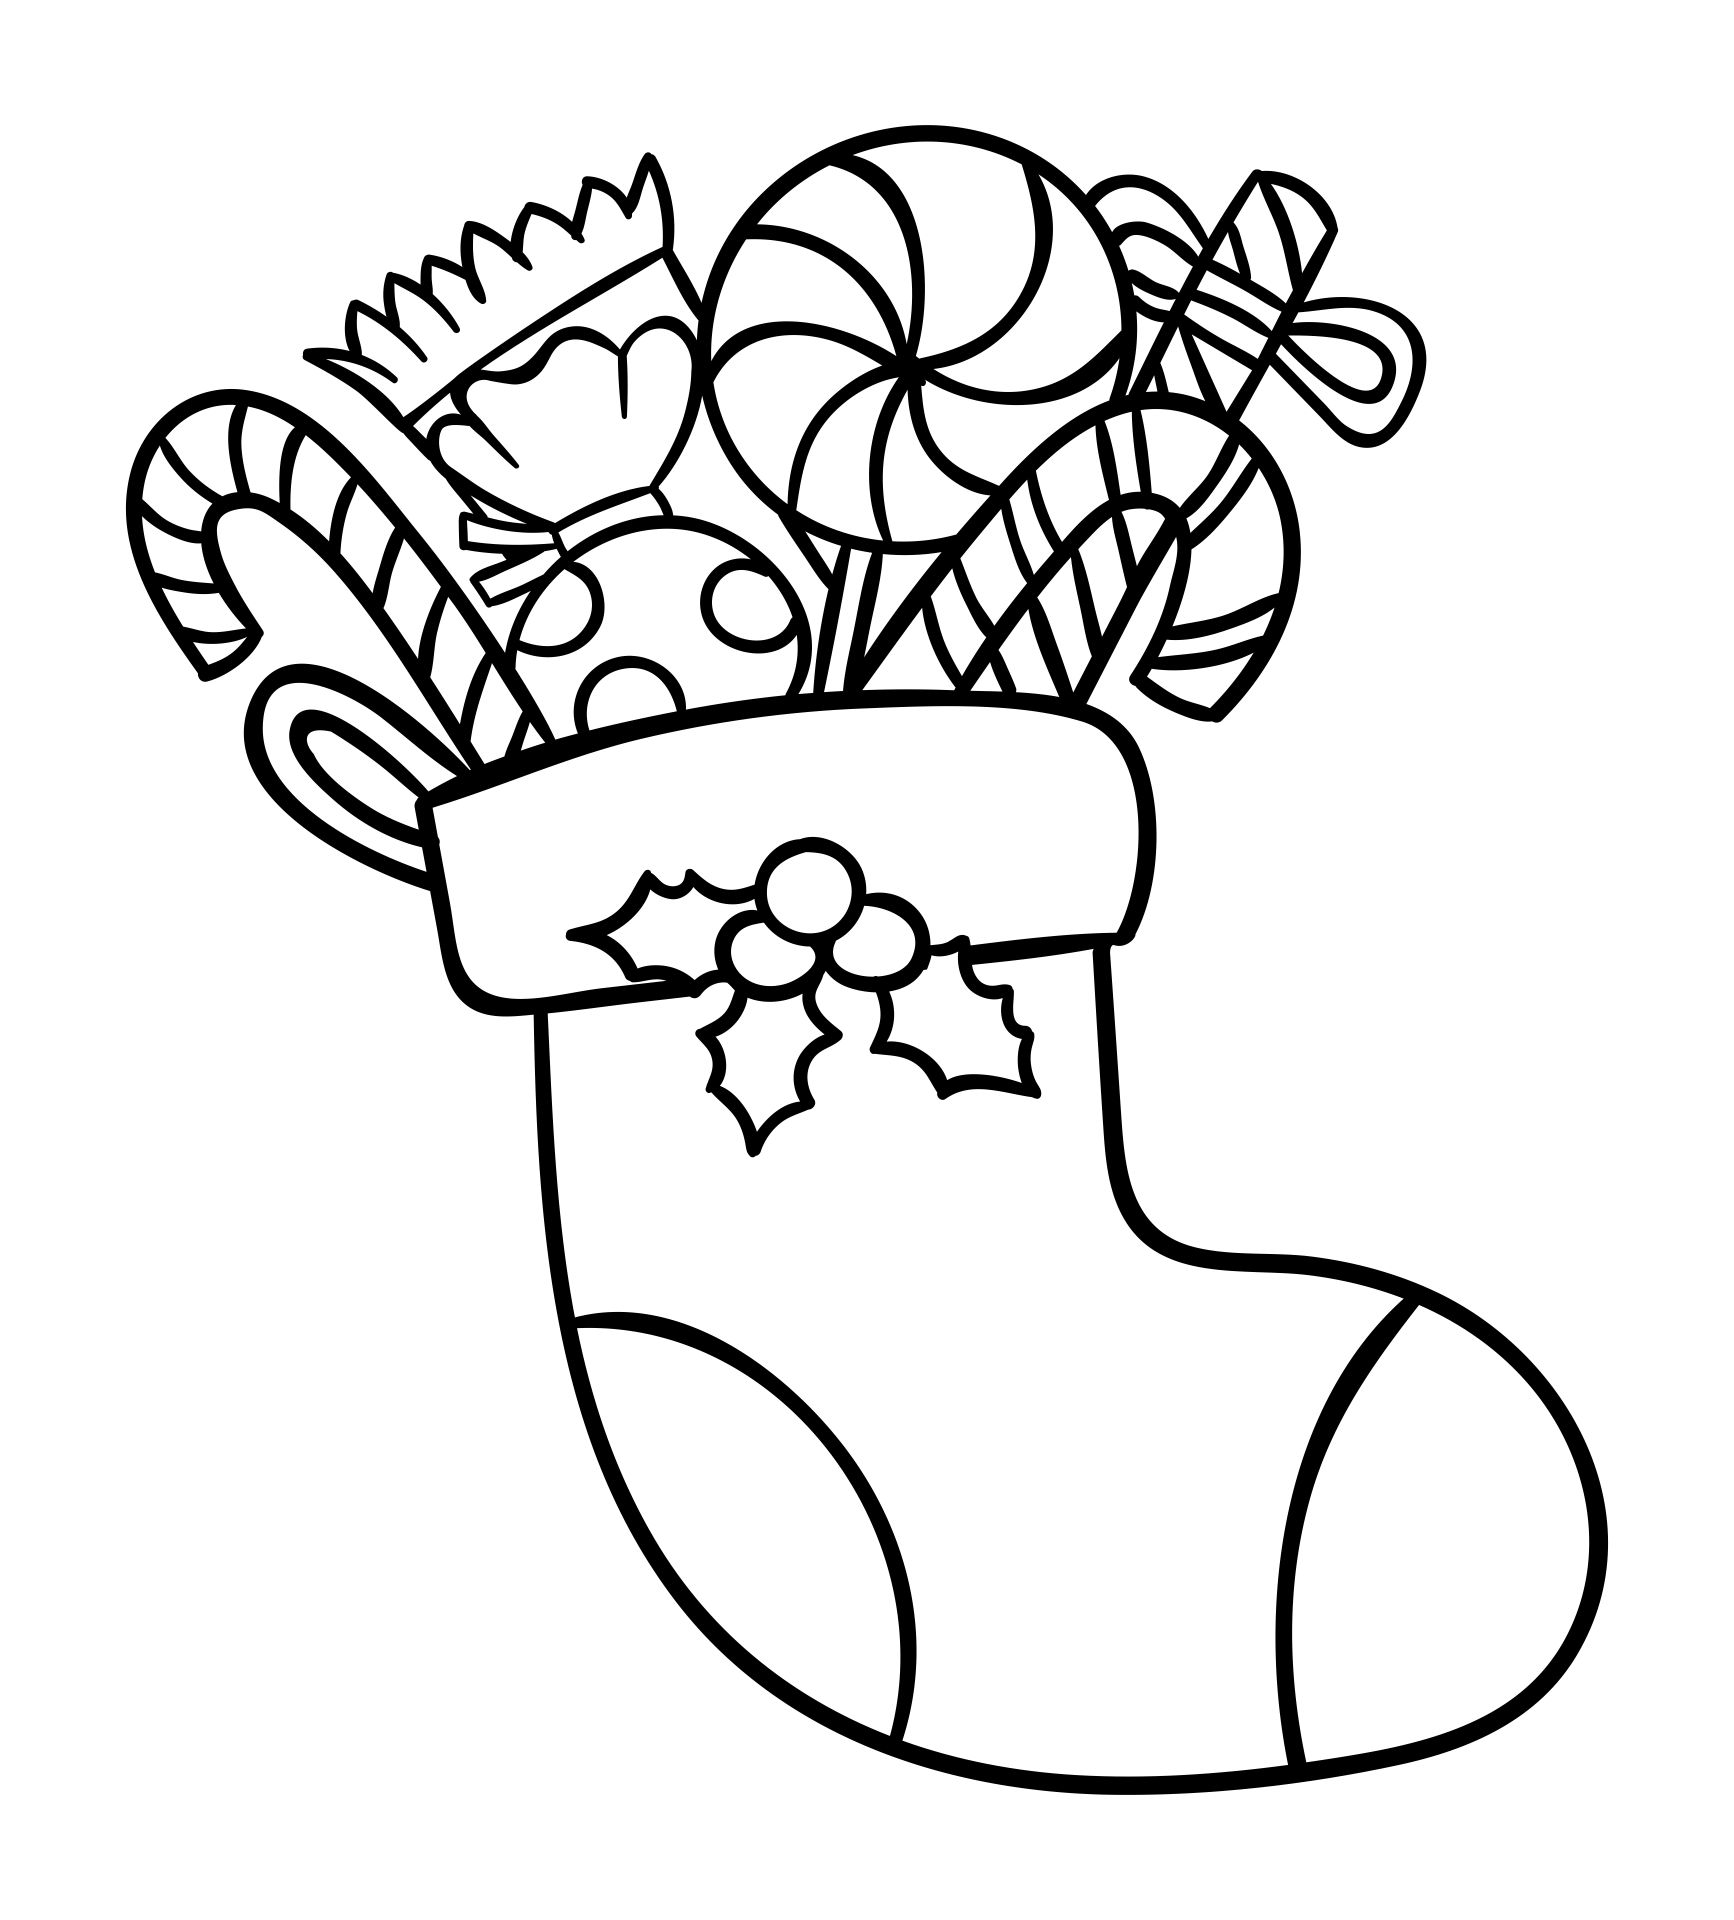 10 Best Christmas Stocking Coloring Pages Printable - printablee.com